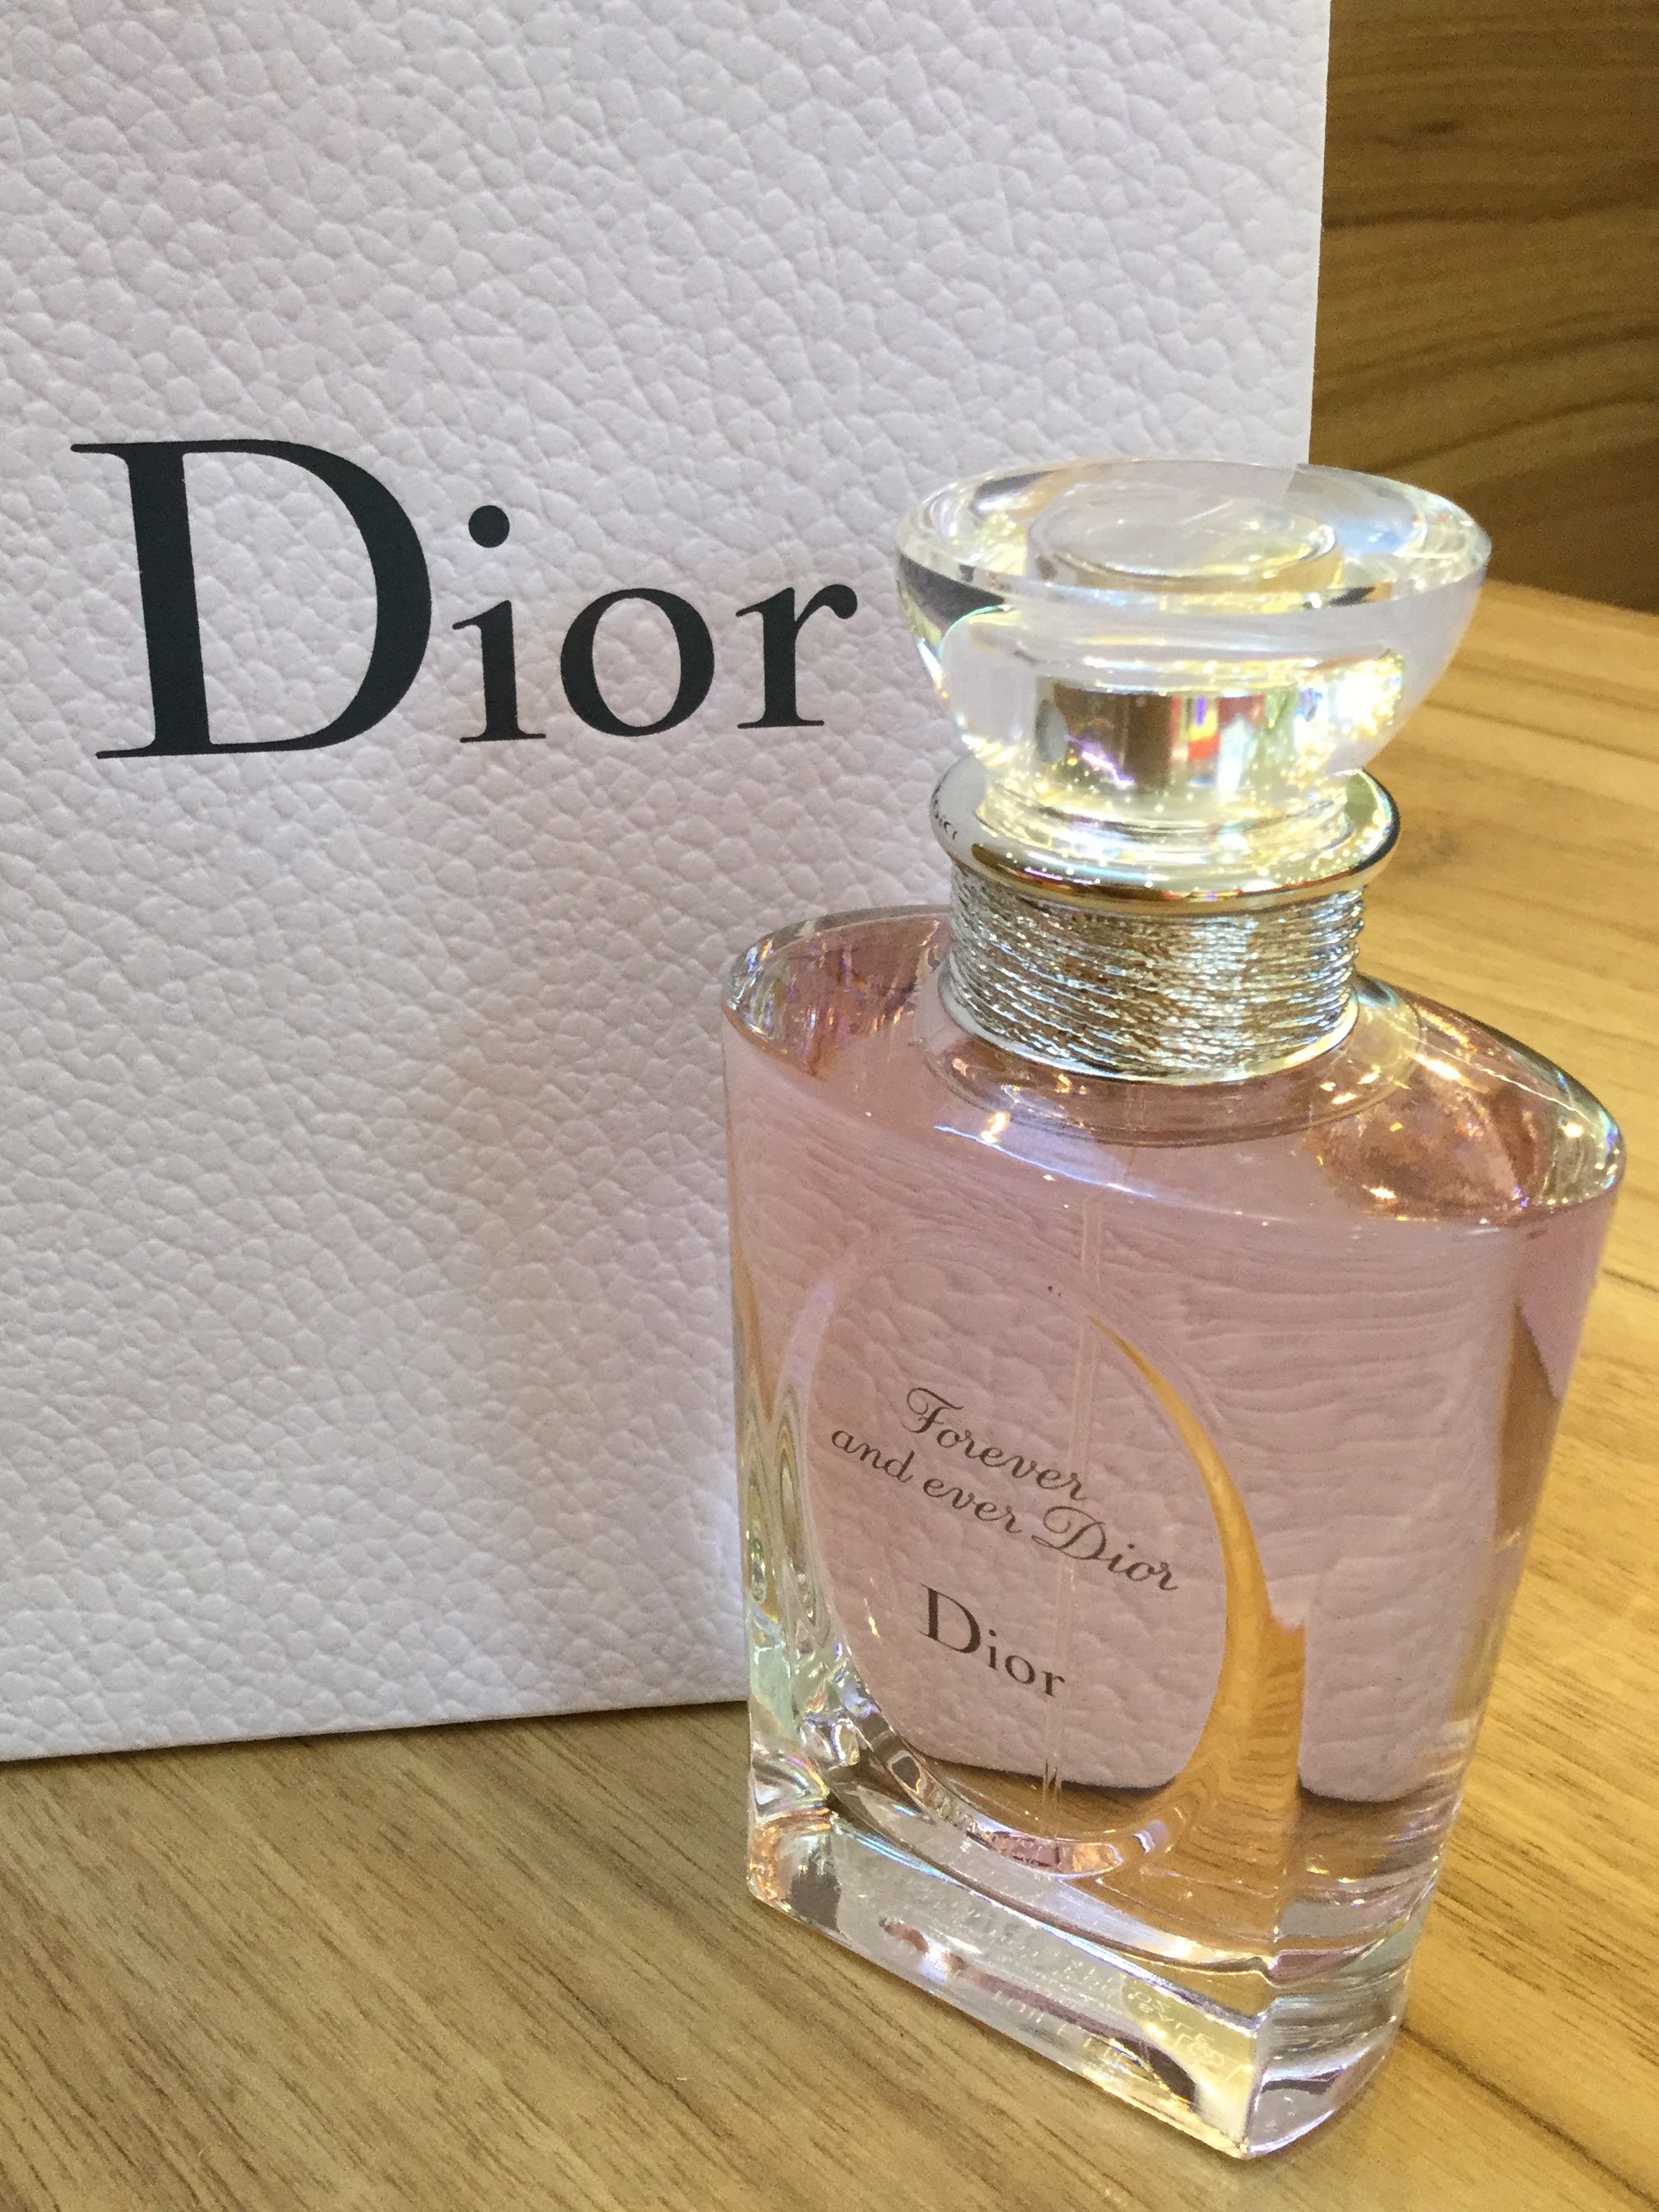 Forever and Ever Dior Dior perfume  a fragrance for women 2006